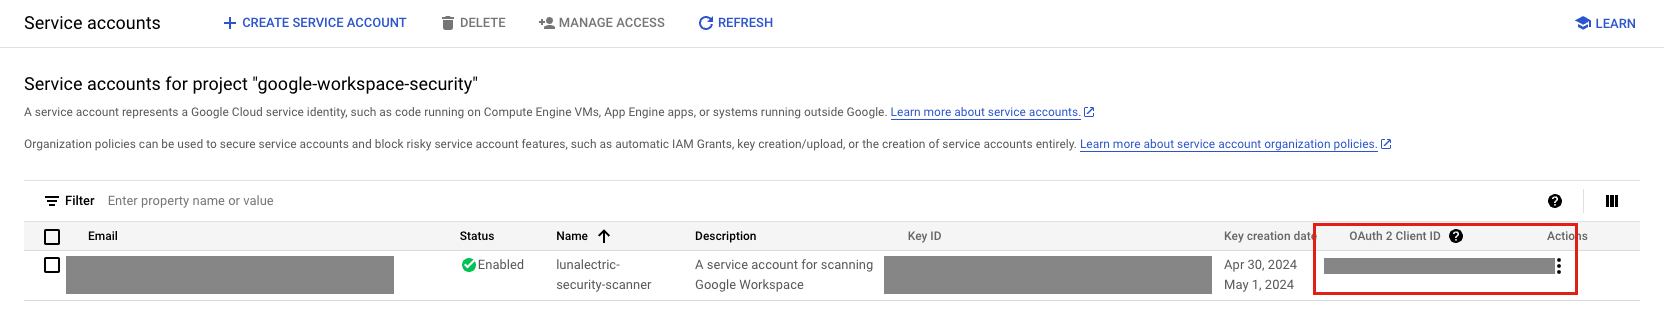 Google Service Account Client ID